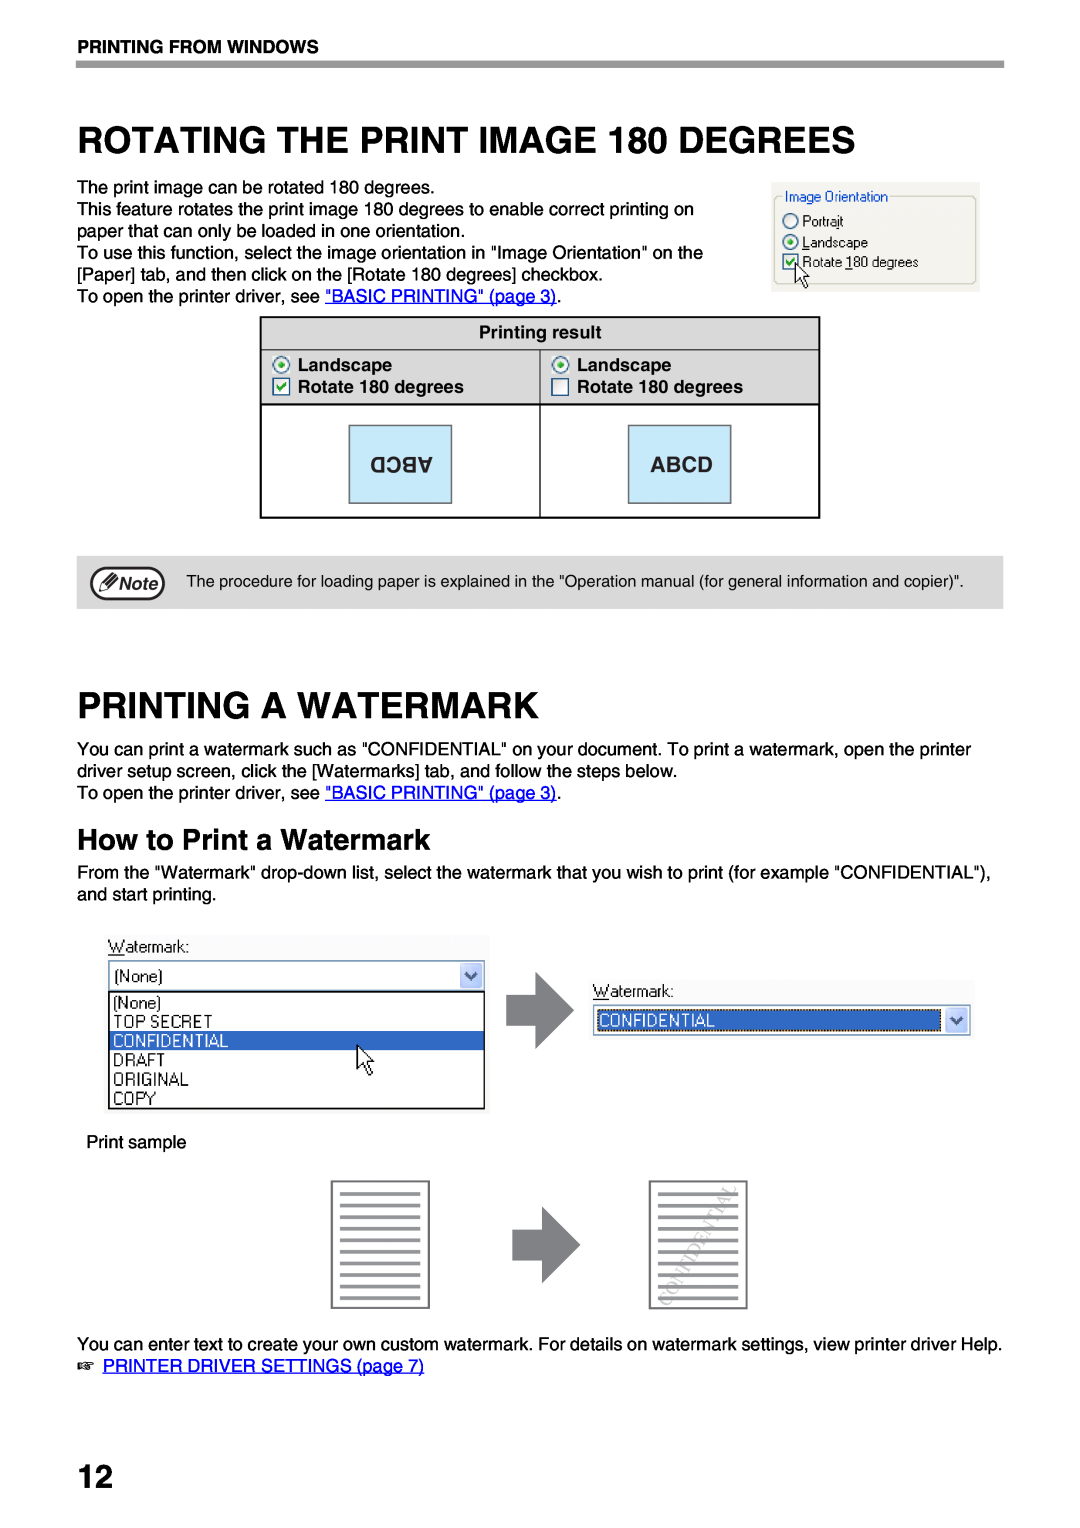 Sharp AR-NB3 operation manual ROTATING THE PRINT IMAGE 180 DEGREES, Printing A Watermark, How to Print a Watermark, Abcd 